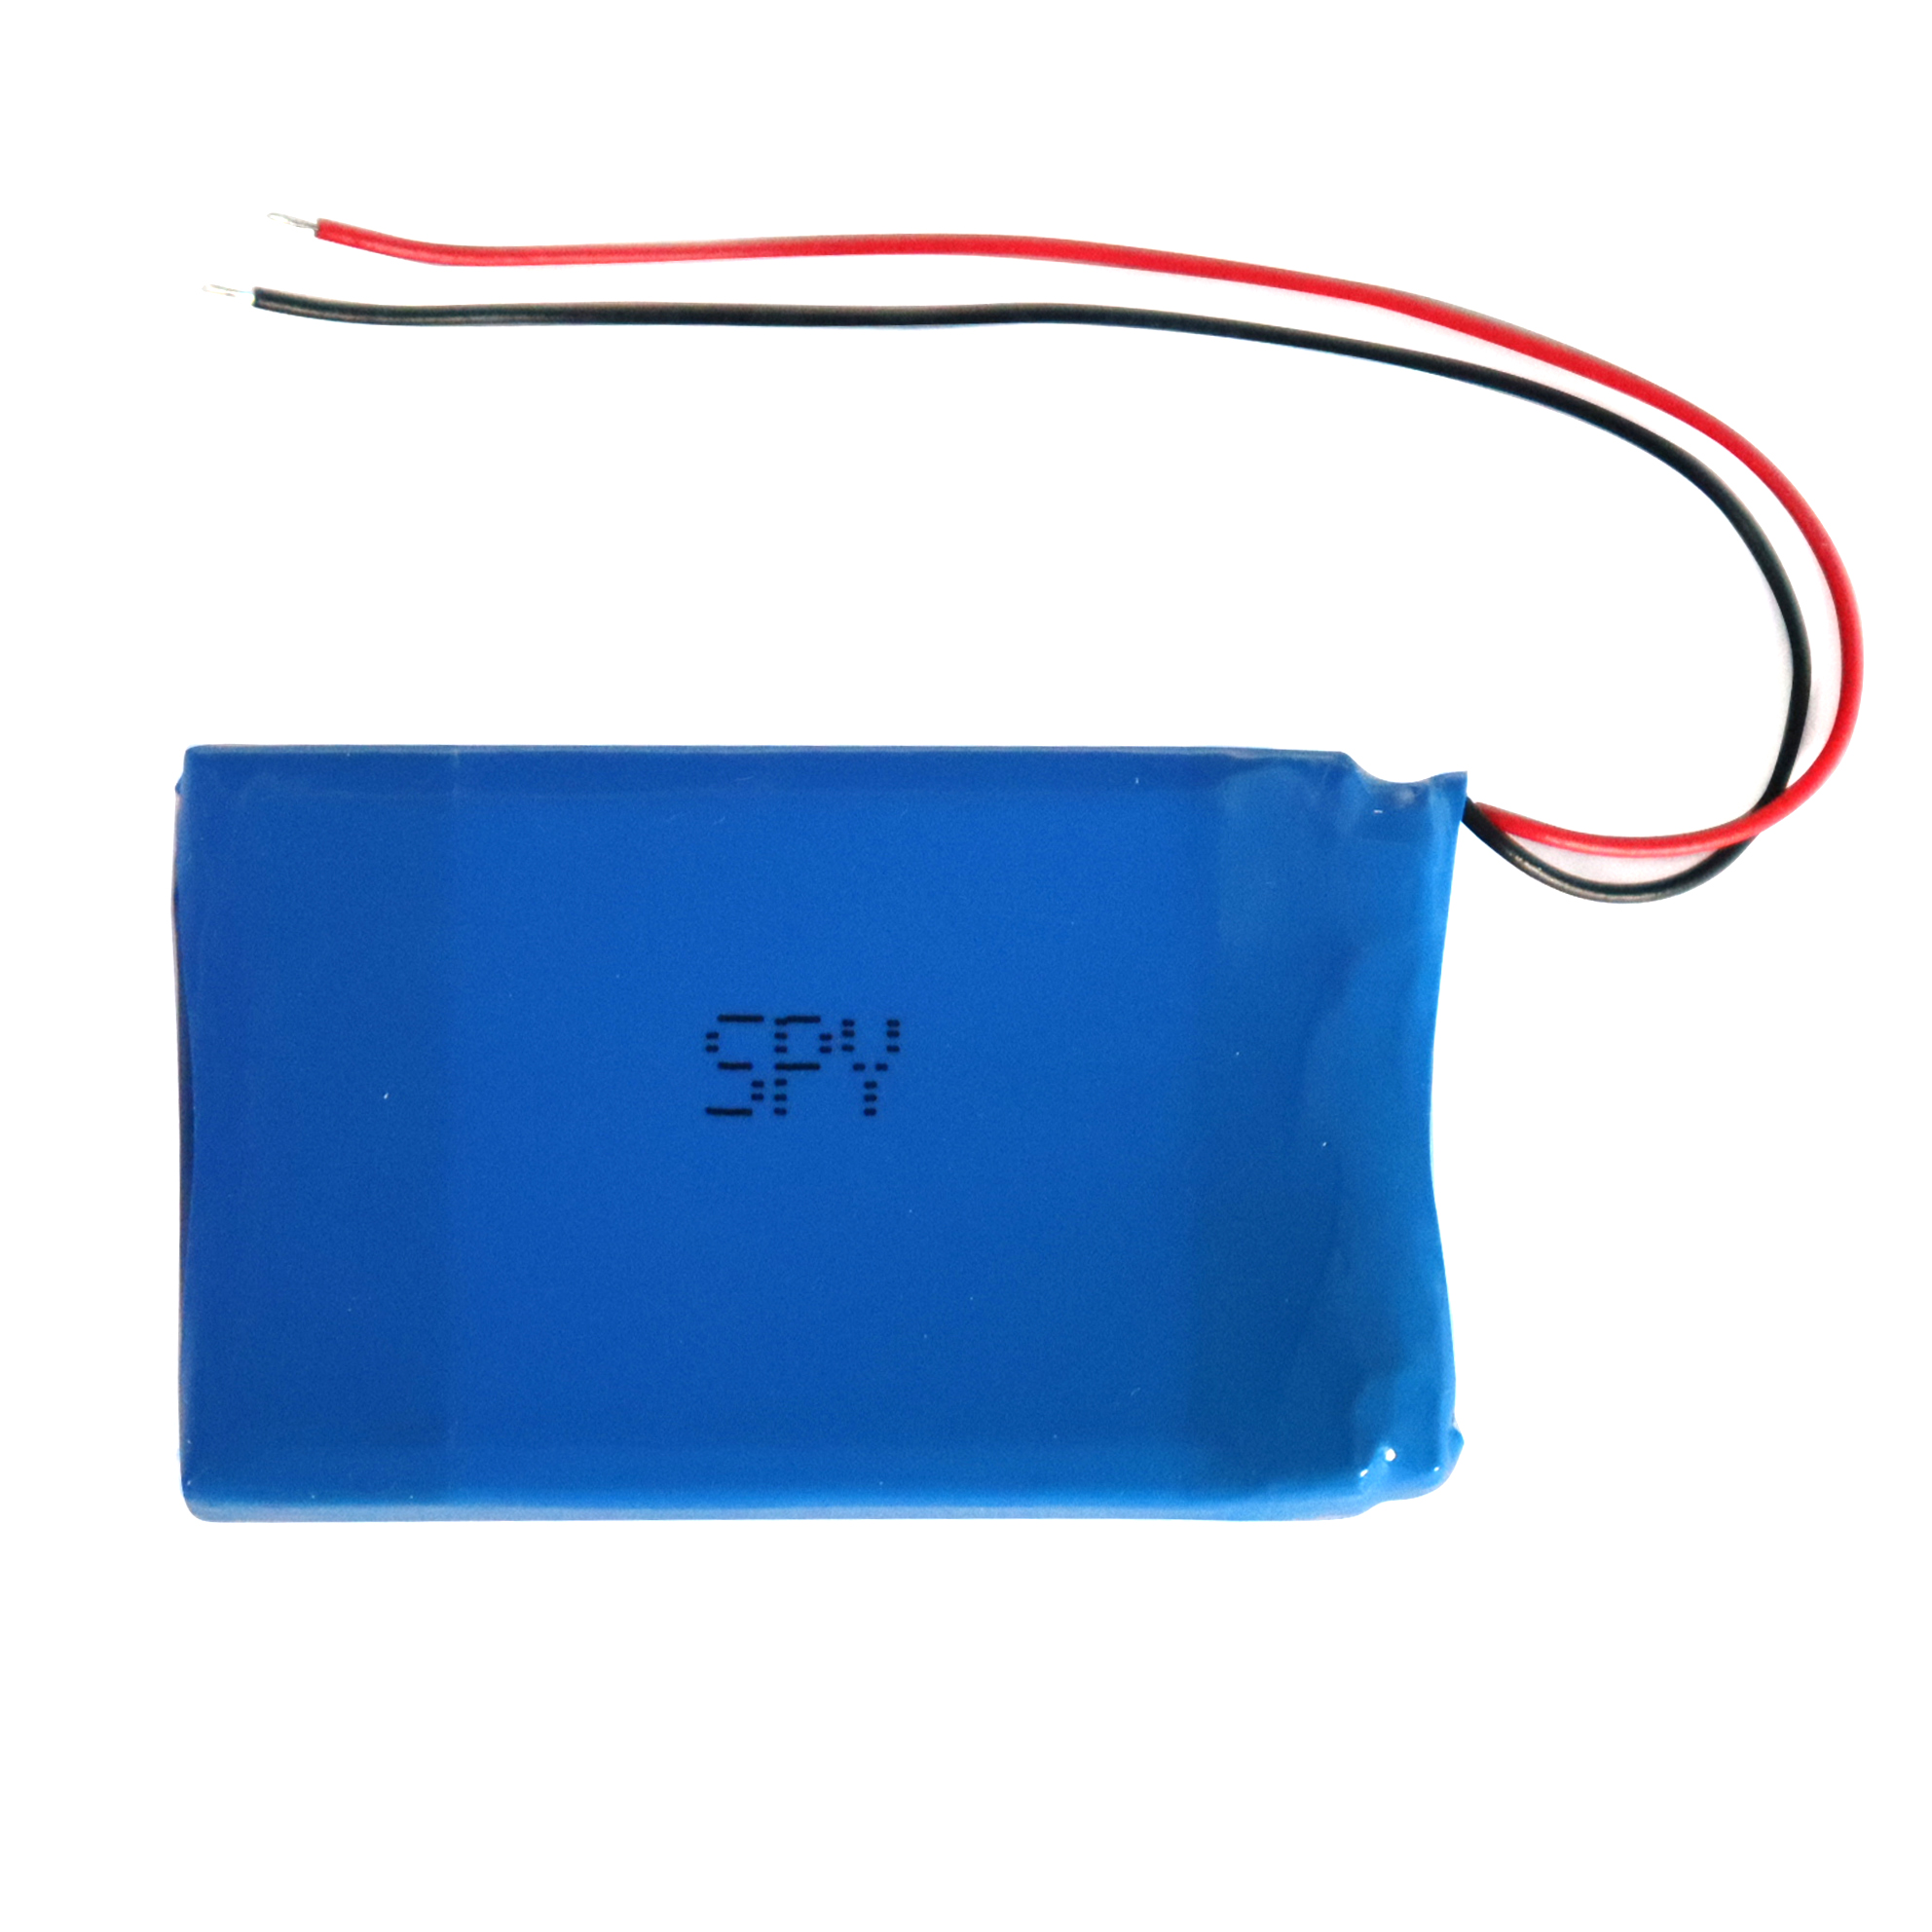 Lithium Ion Polymer Battery 7.4V 850mAh Pouch Battery Pack